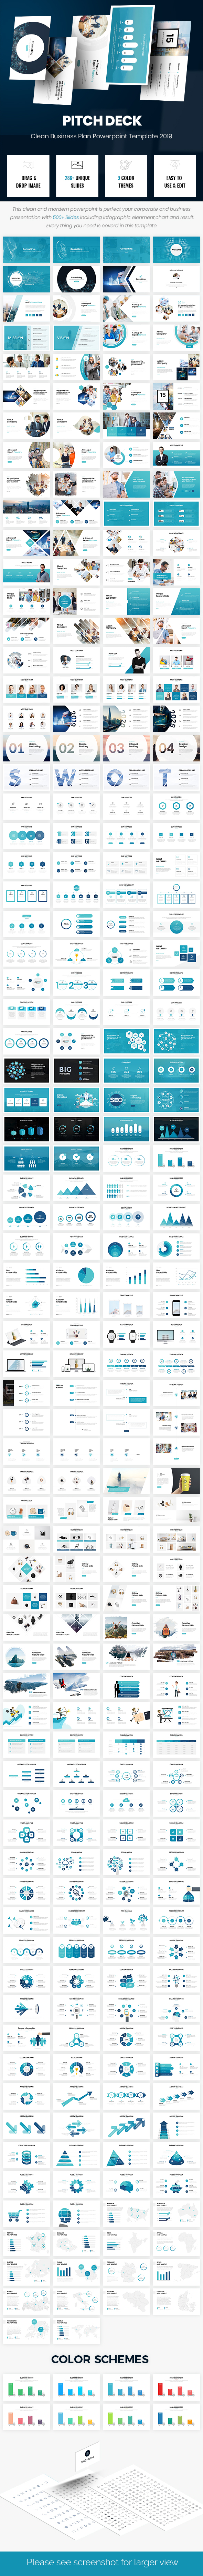 2 in 1 Pitch Deck Bundle Powerpoint Template 2019